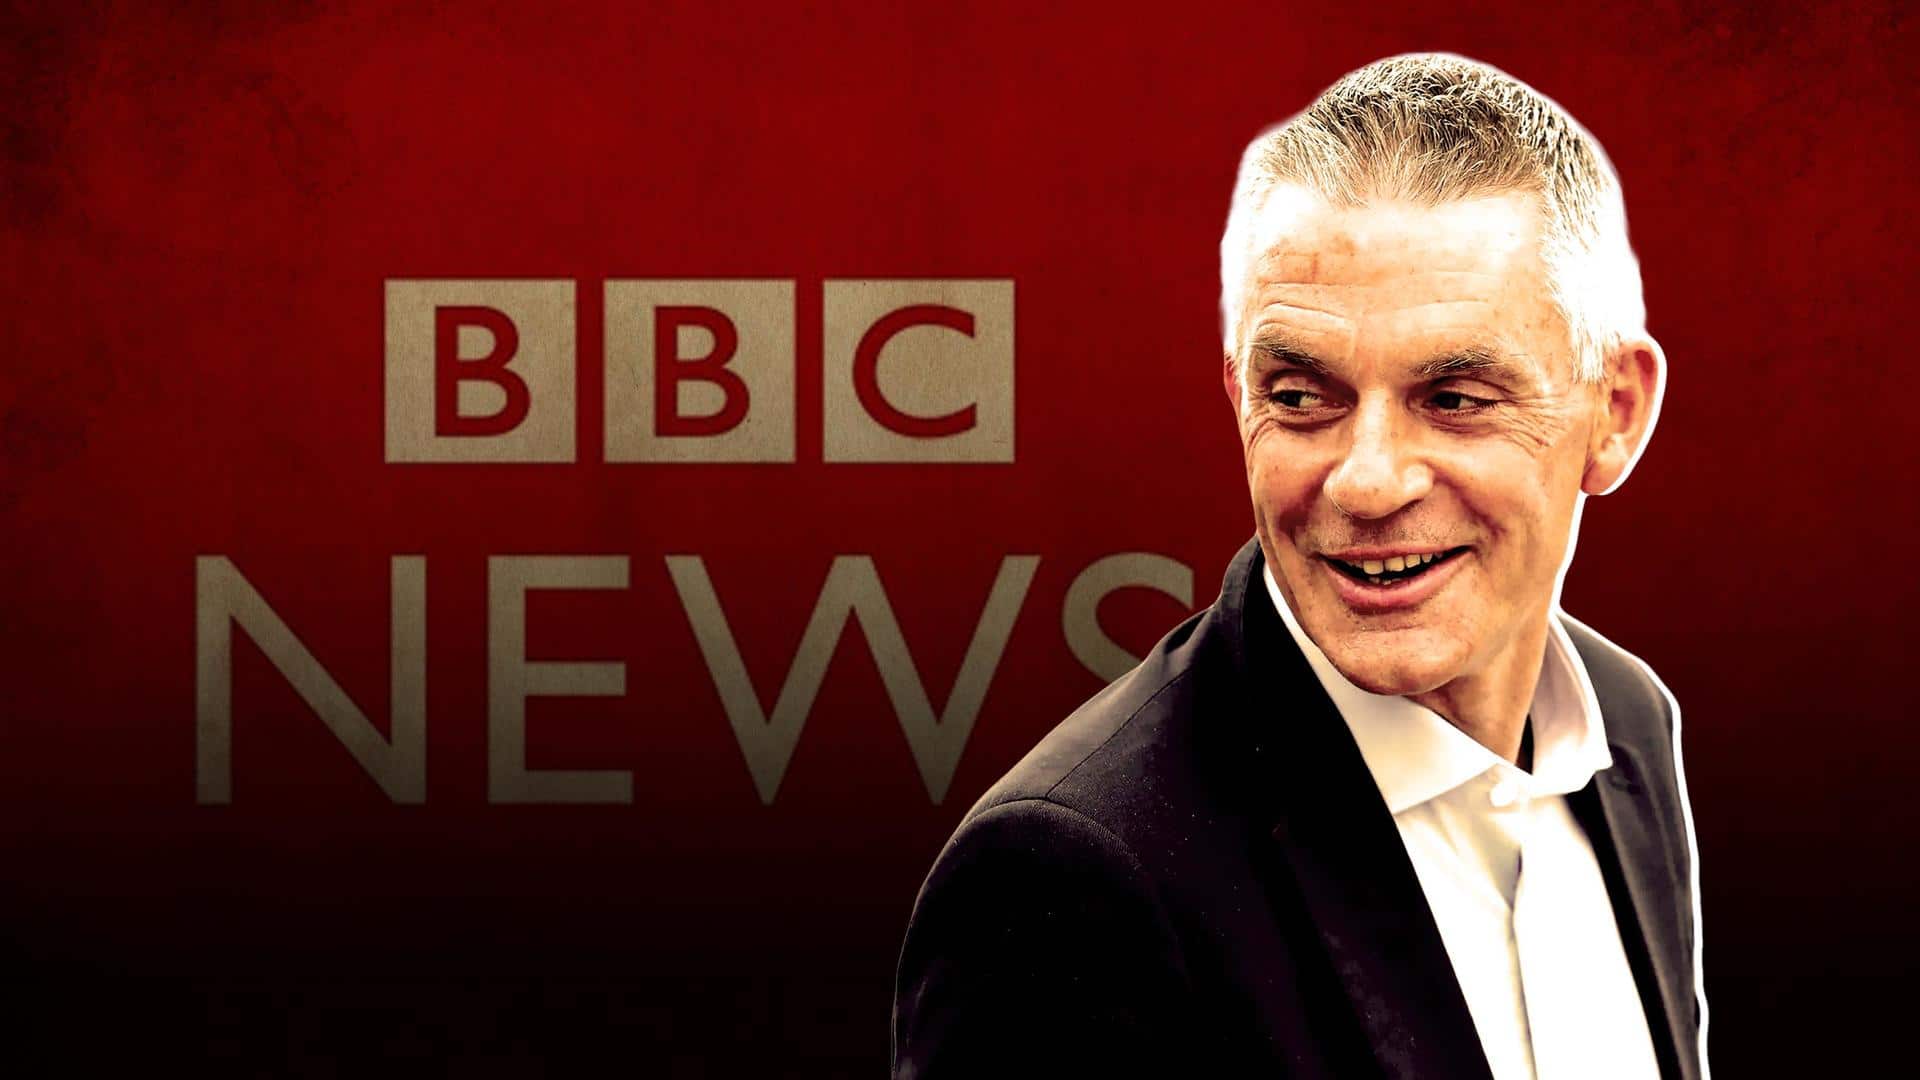 Report fearlessly: BBC director-general to India staff after tax 'survey'